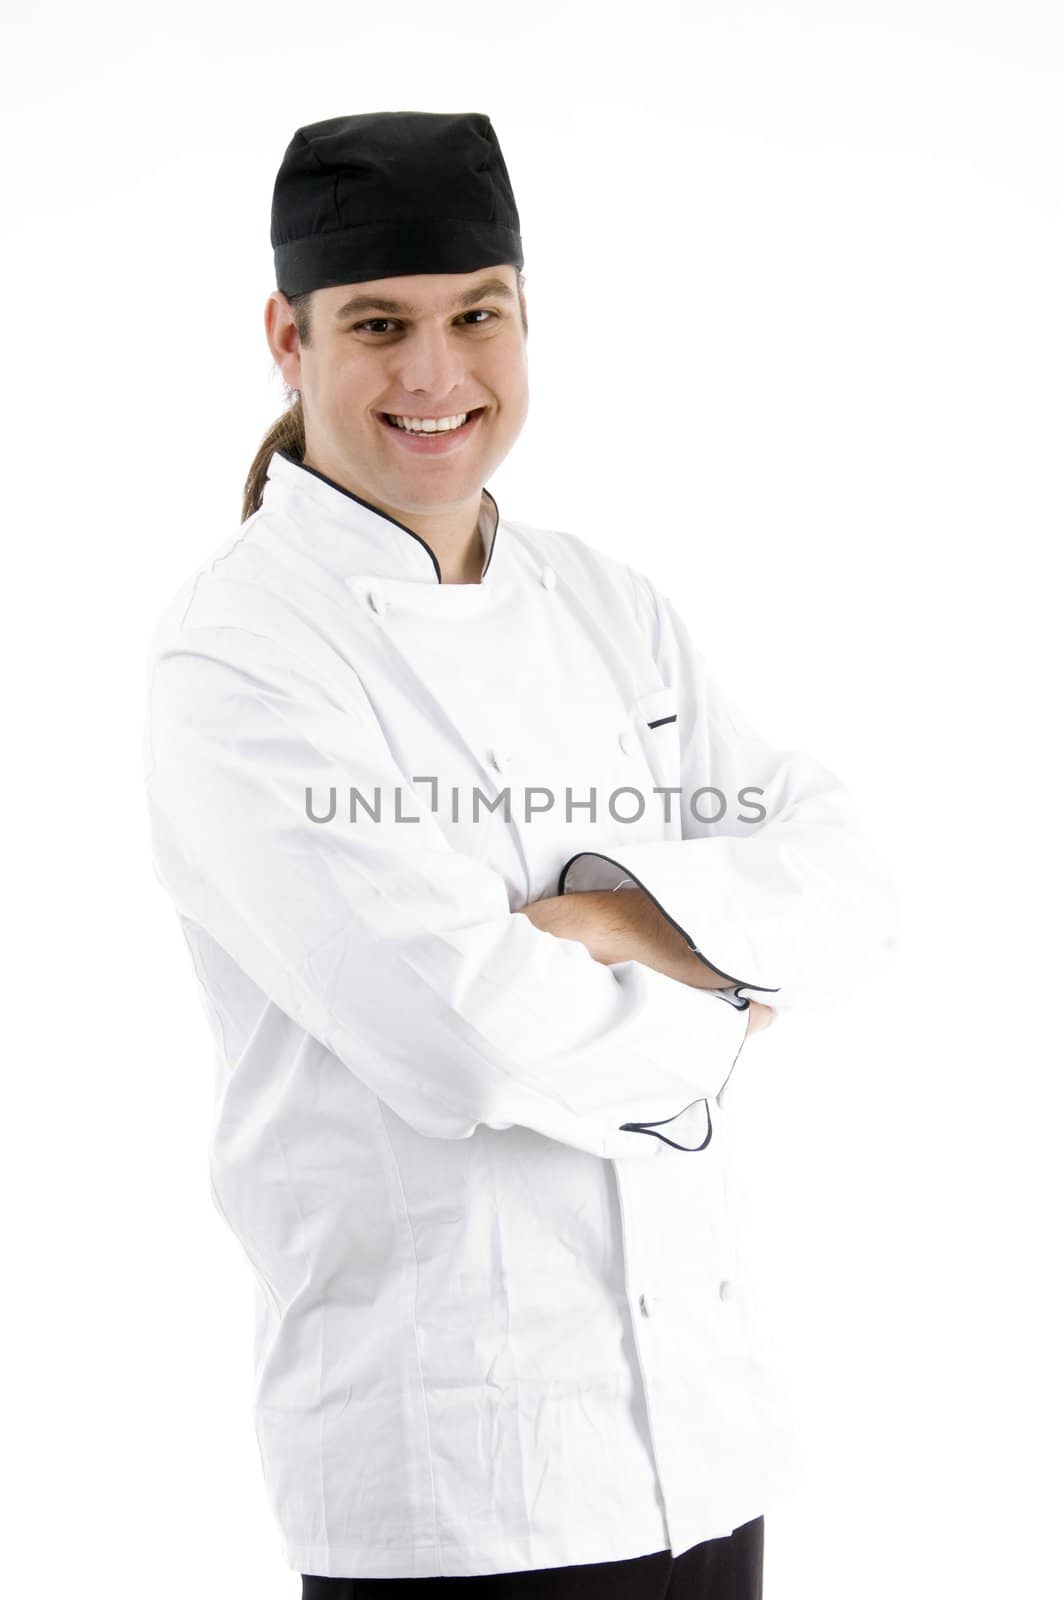 smart male chef posing by imagerymajestic